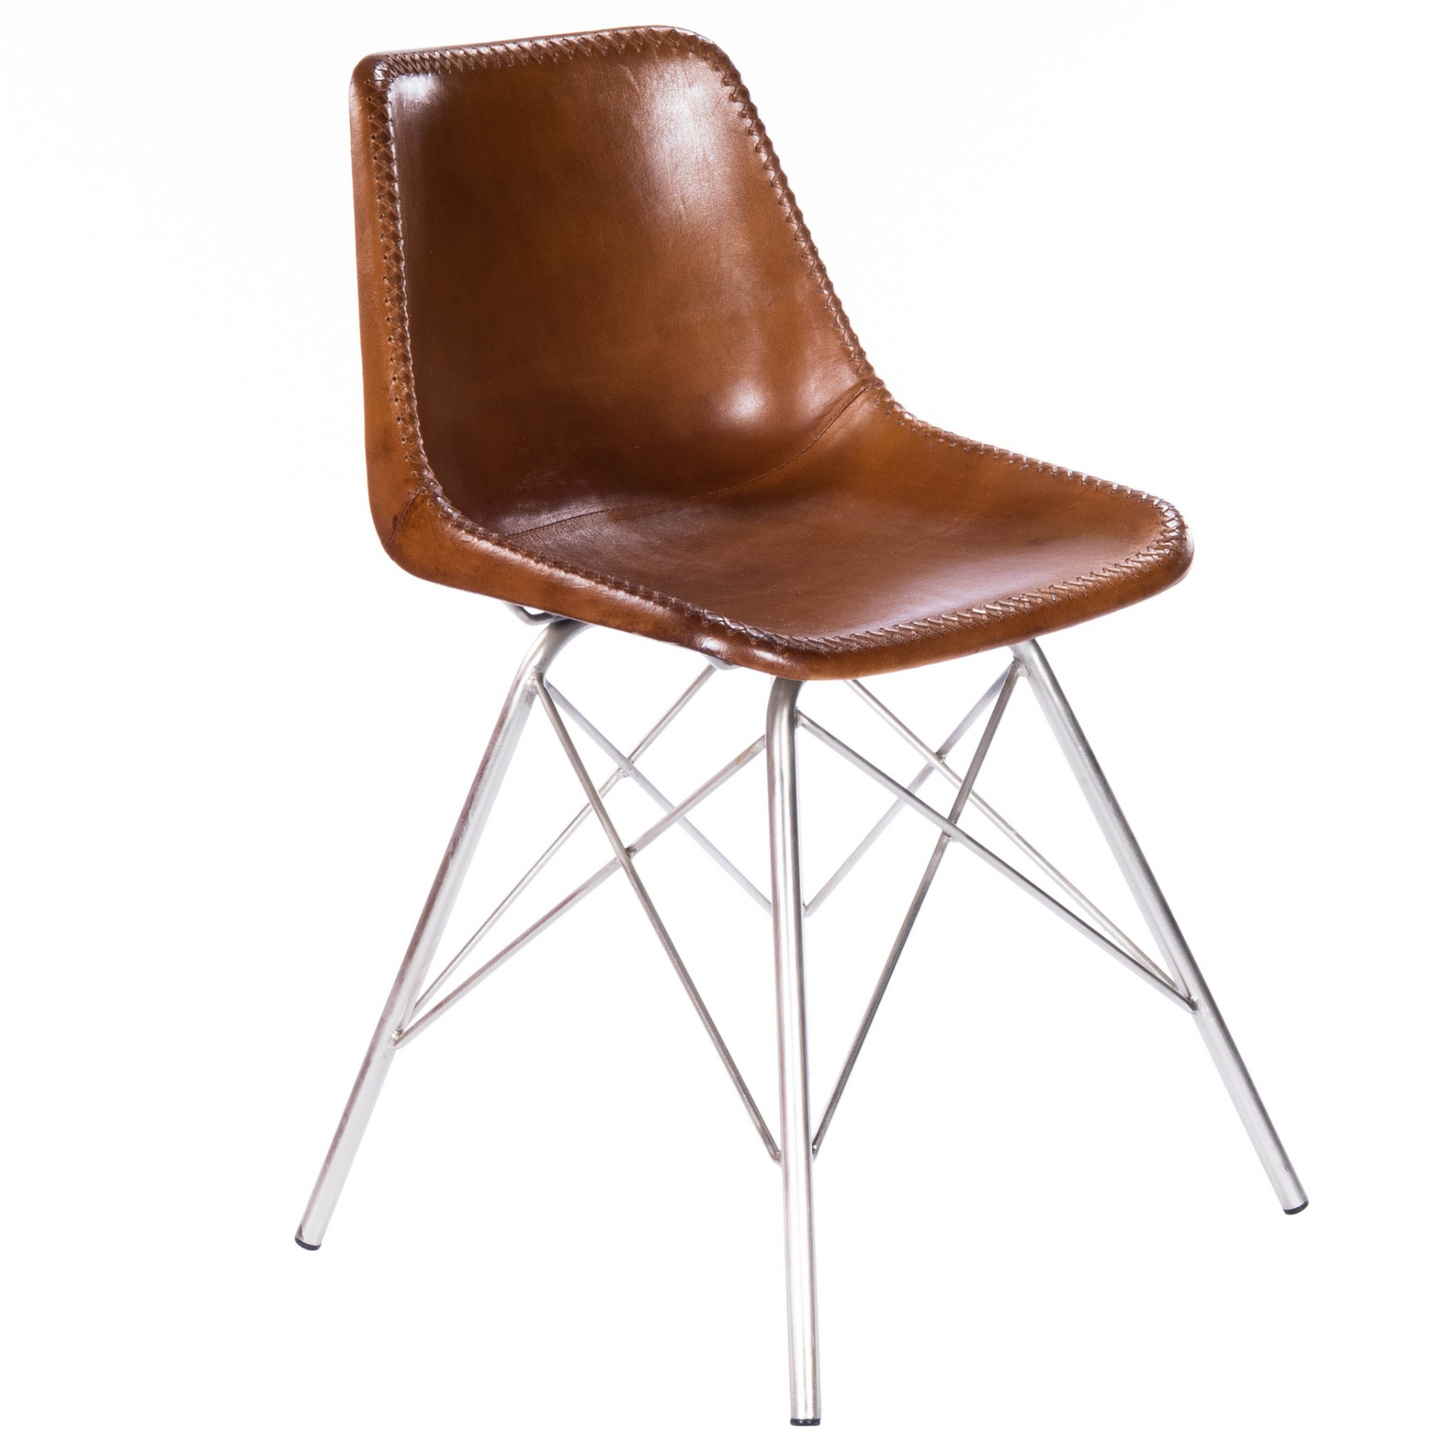 brown leather bucket chair with silver Eiffel Tower base